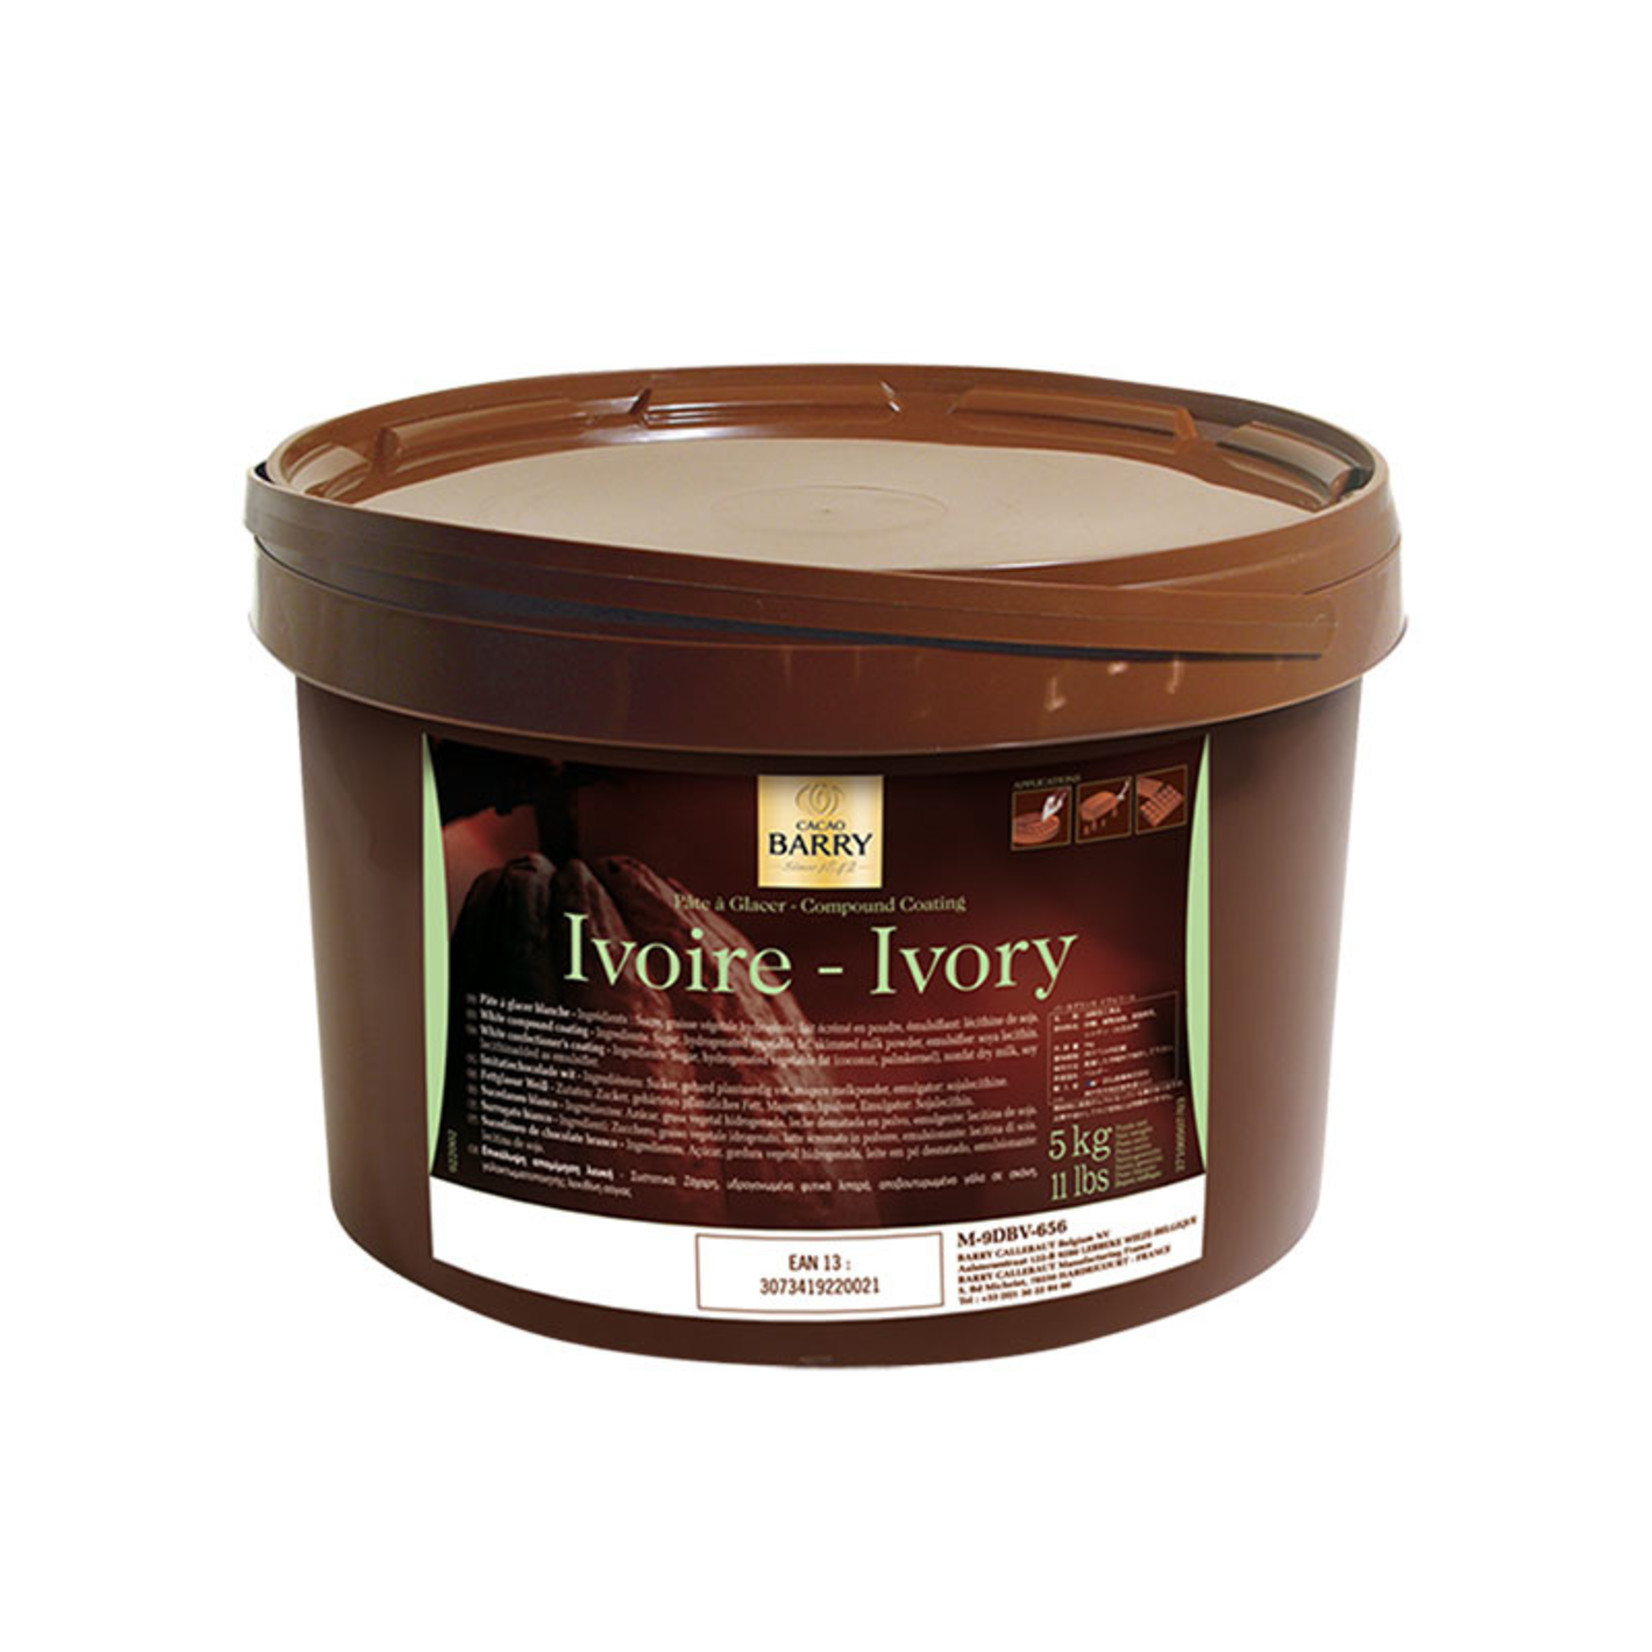 Cacao Barry Cacao Barry - Pate Glacer Ivoire/White - 5kg/11lb, M-9DBV-656